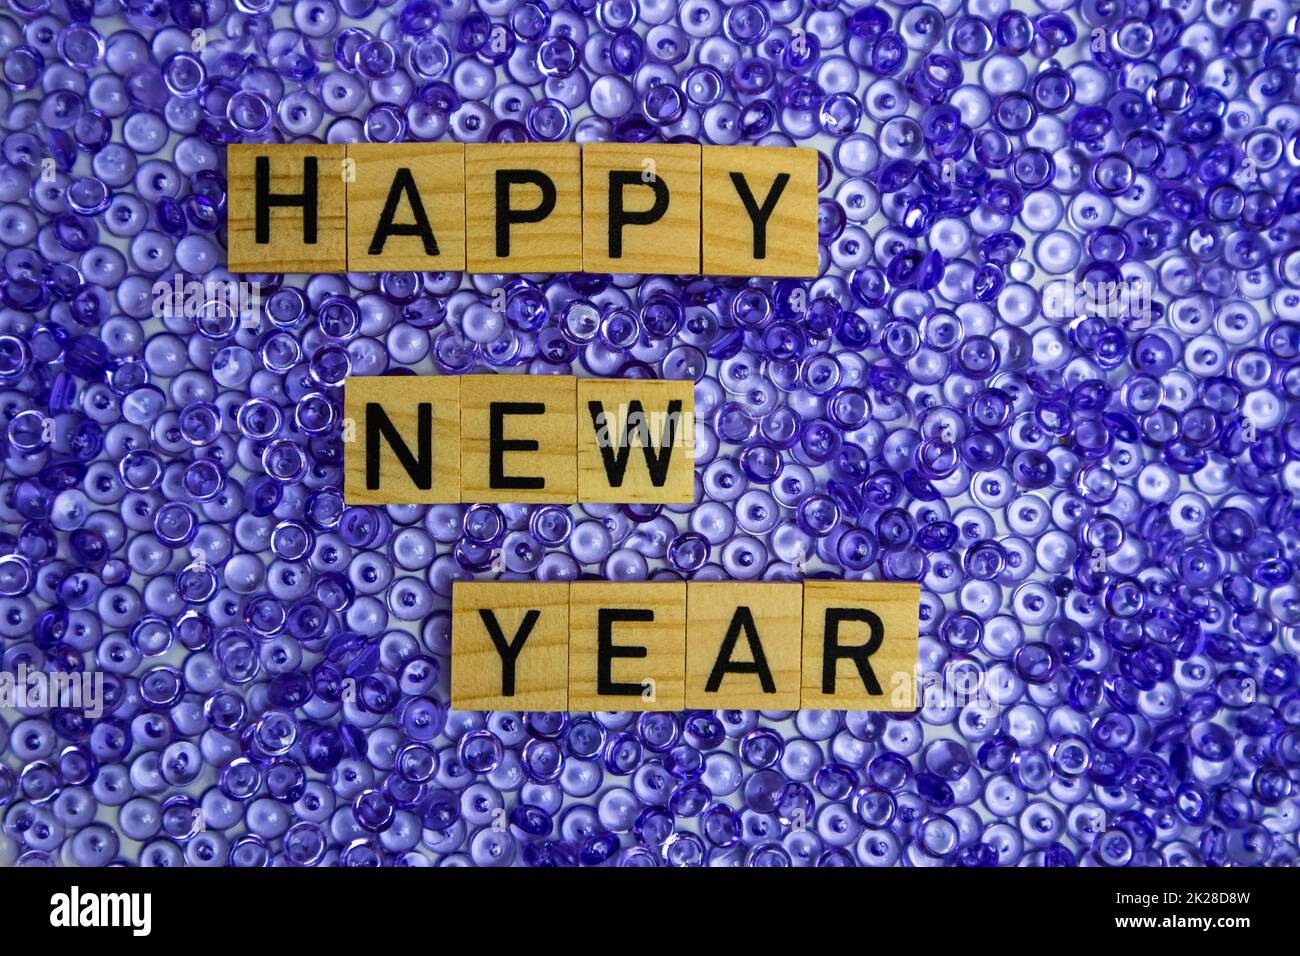 Text Happy New Year from wooden letters on a purple pearl background. Stock Photo